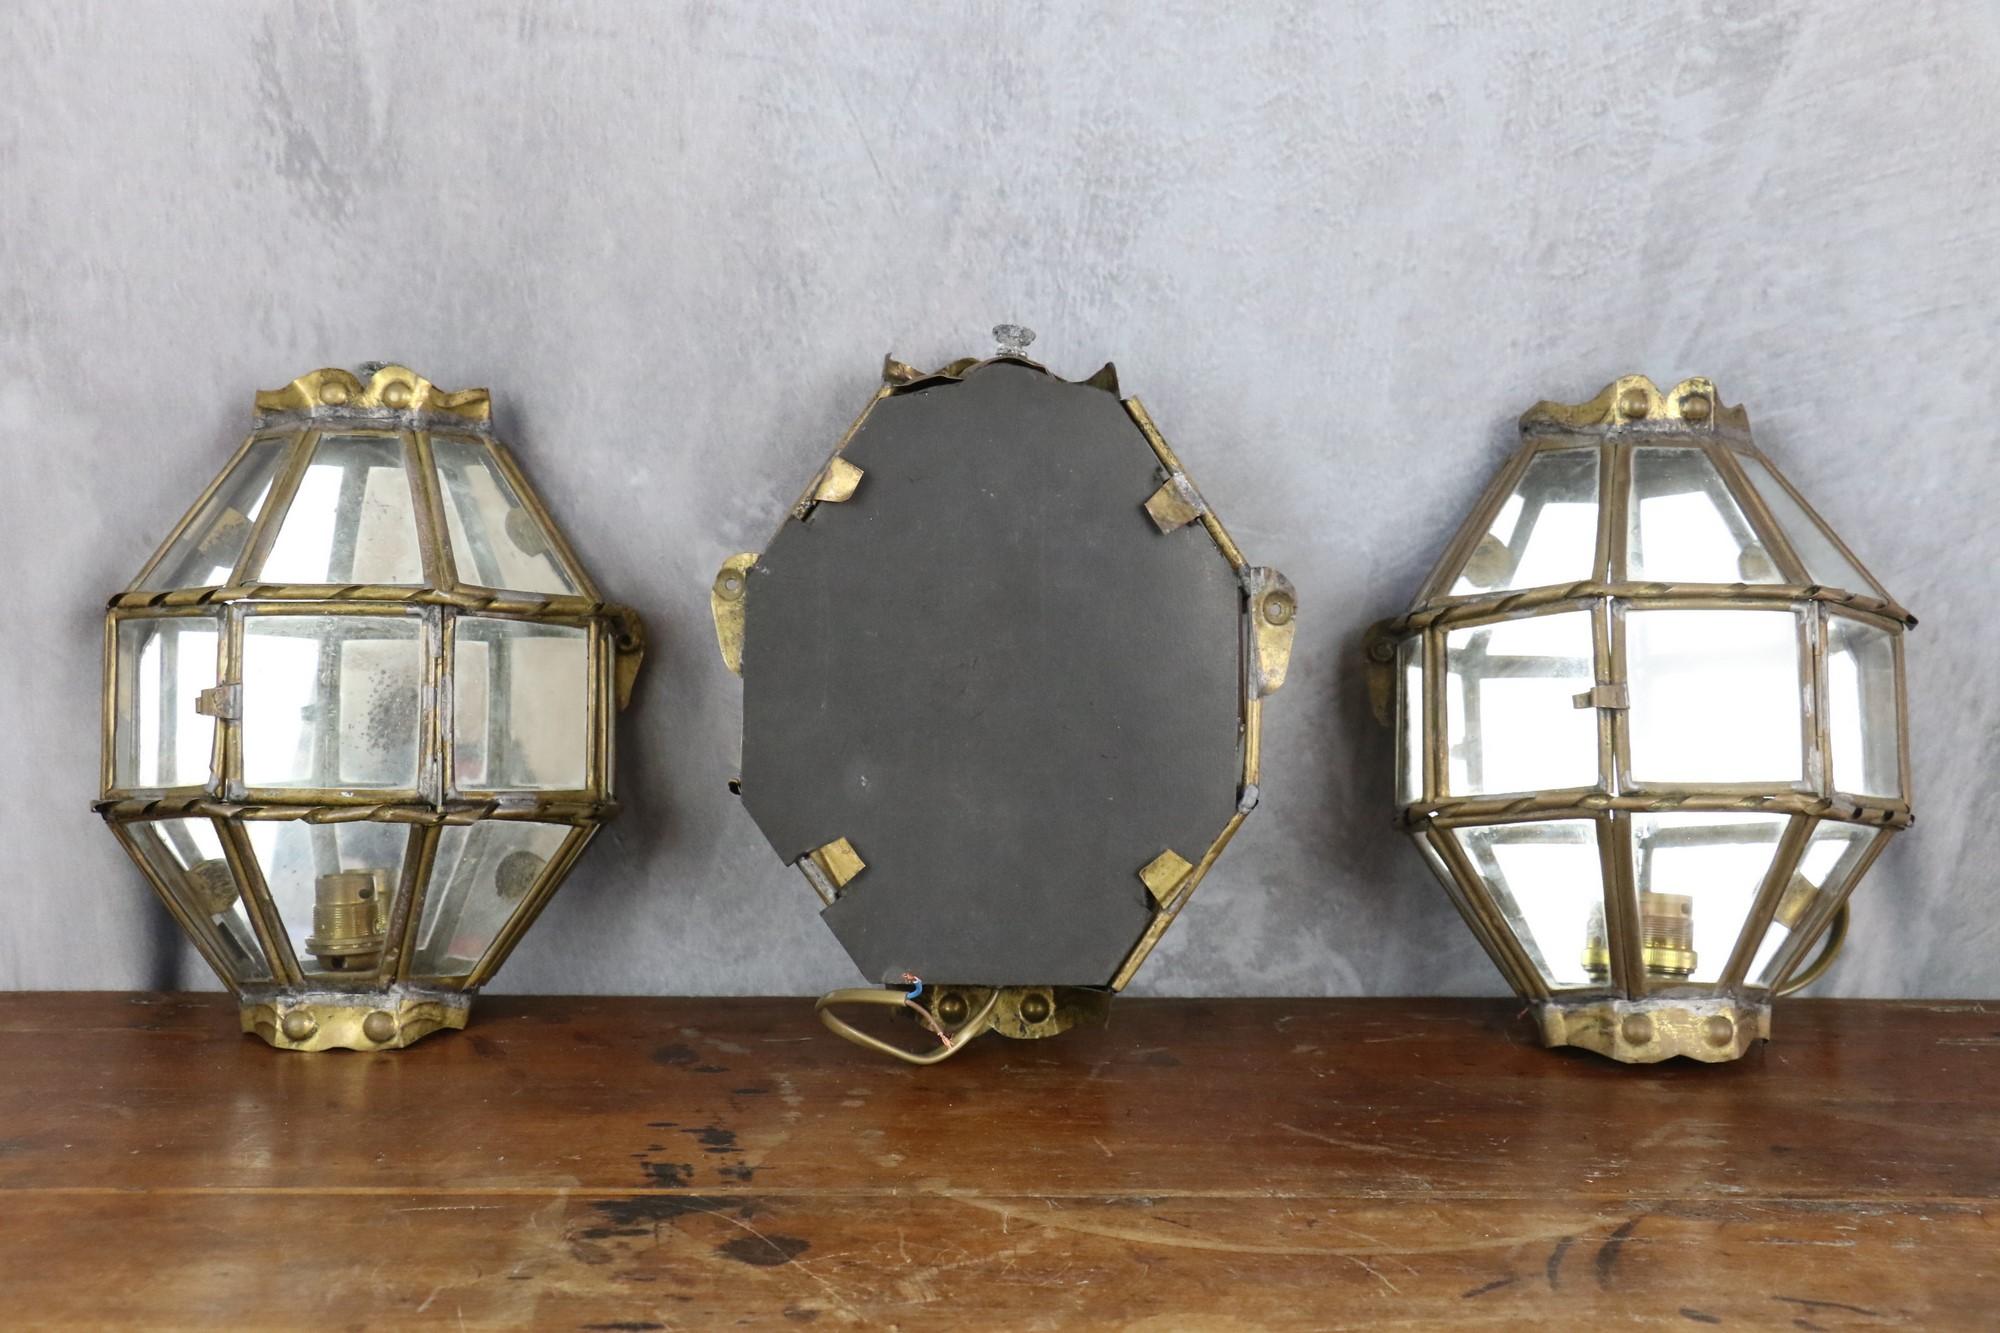 Trio of Brass and Glass Vintage Handcrafted Lantern Wall Lamps, 1940s, France In Good Condition For Sale In Camblanes et Meynac, FR